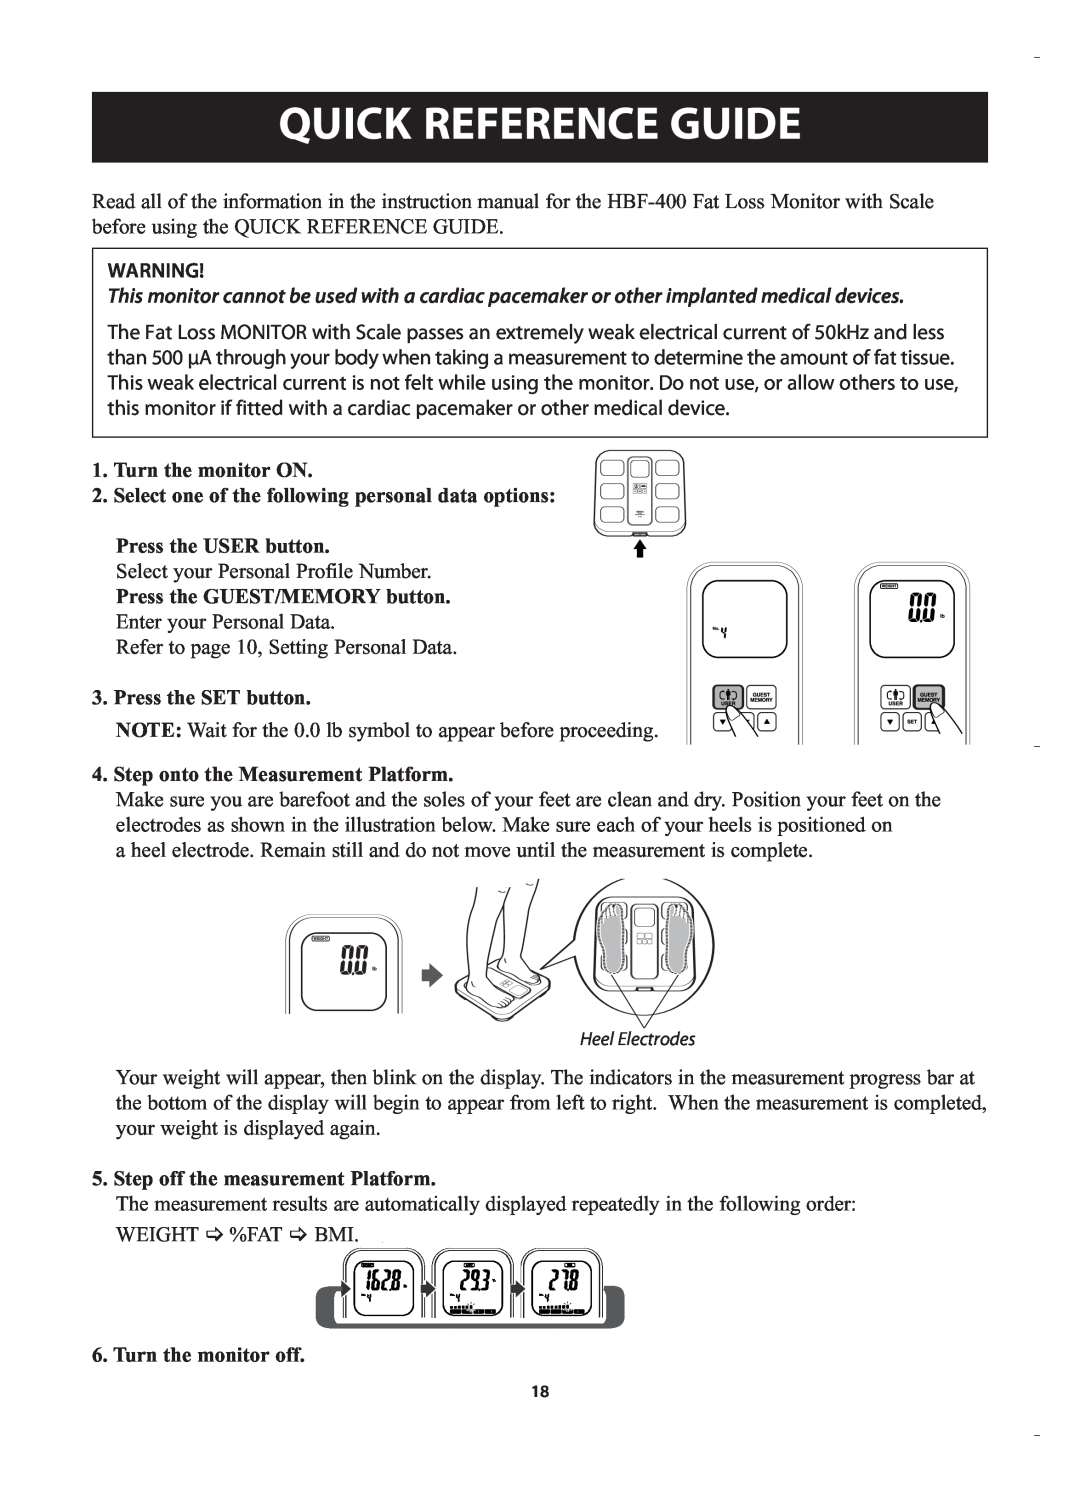 Omron HBF-400 Quick Reference Guide, Turn the monitor ON, Select one of the following personal data options 